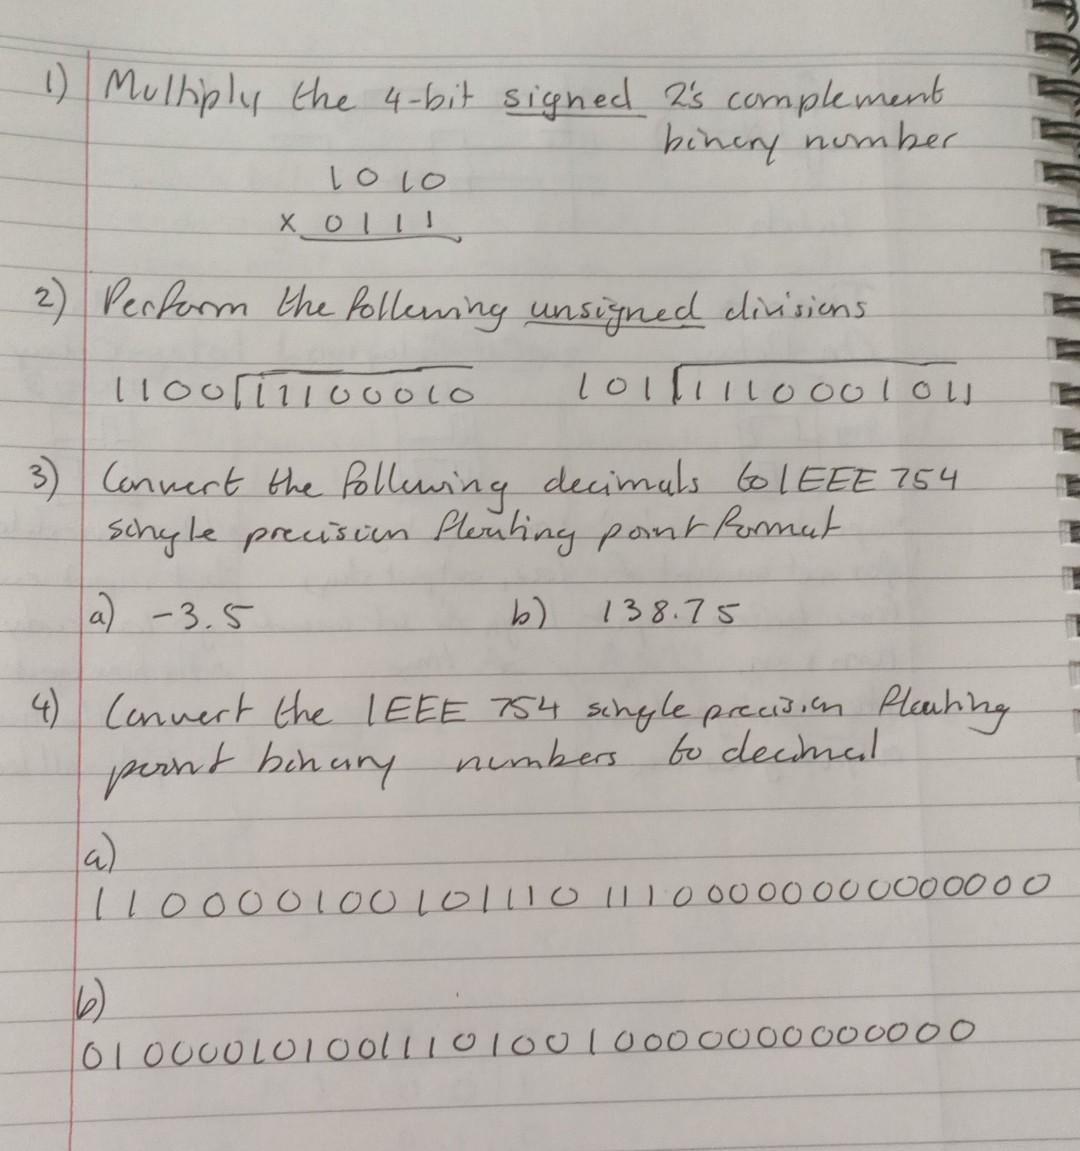 1) Multiply the 4-bit signed 2's complement binery number 1010 X 0111 2 ...